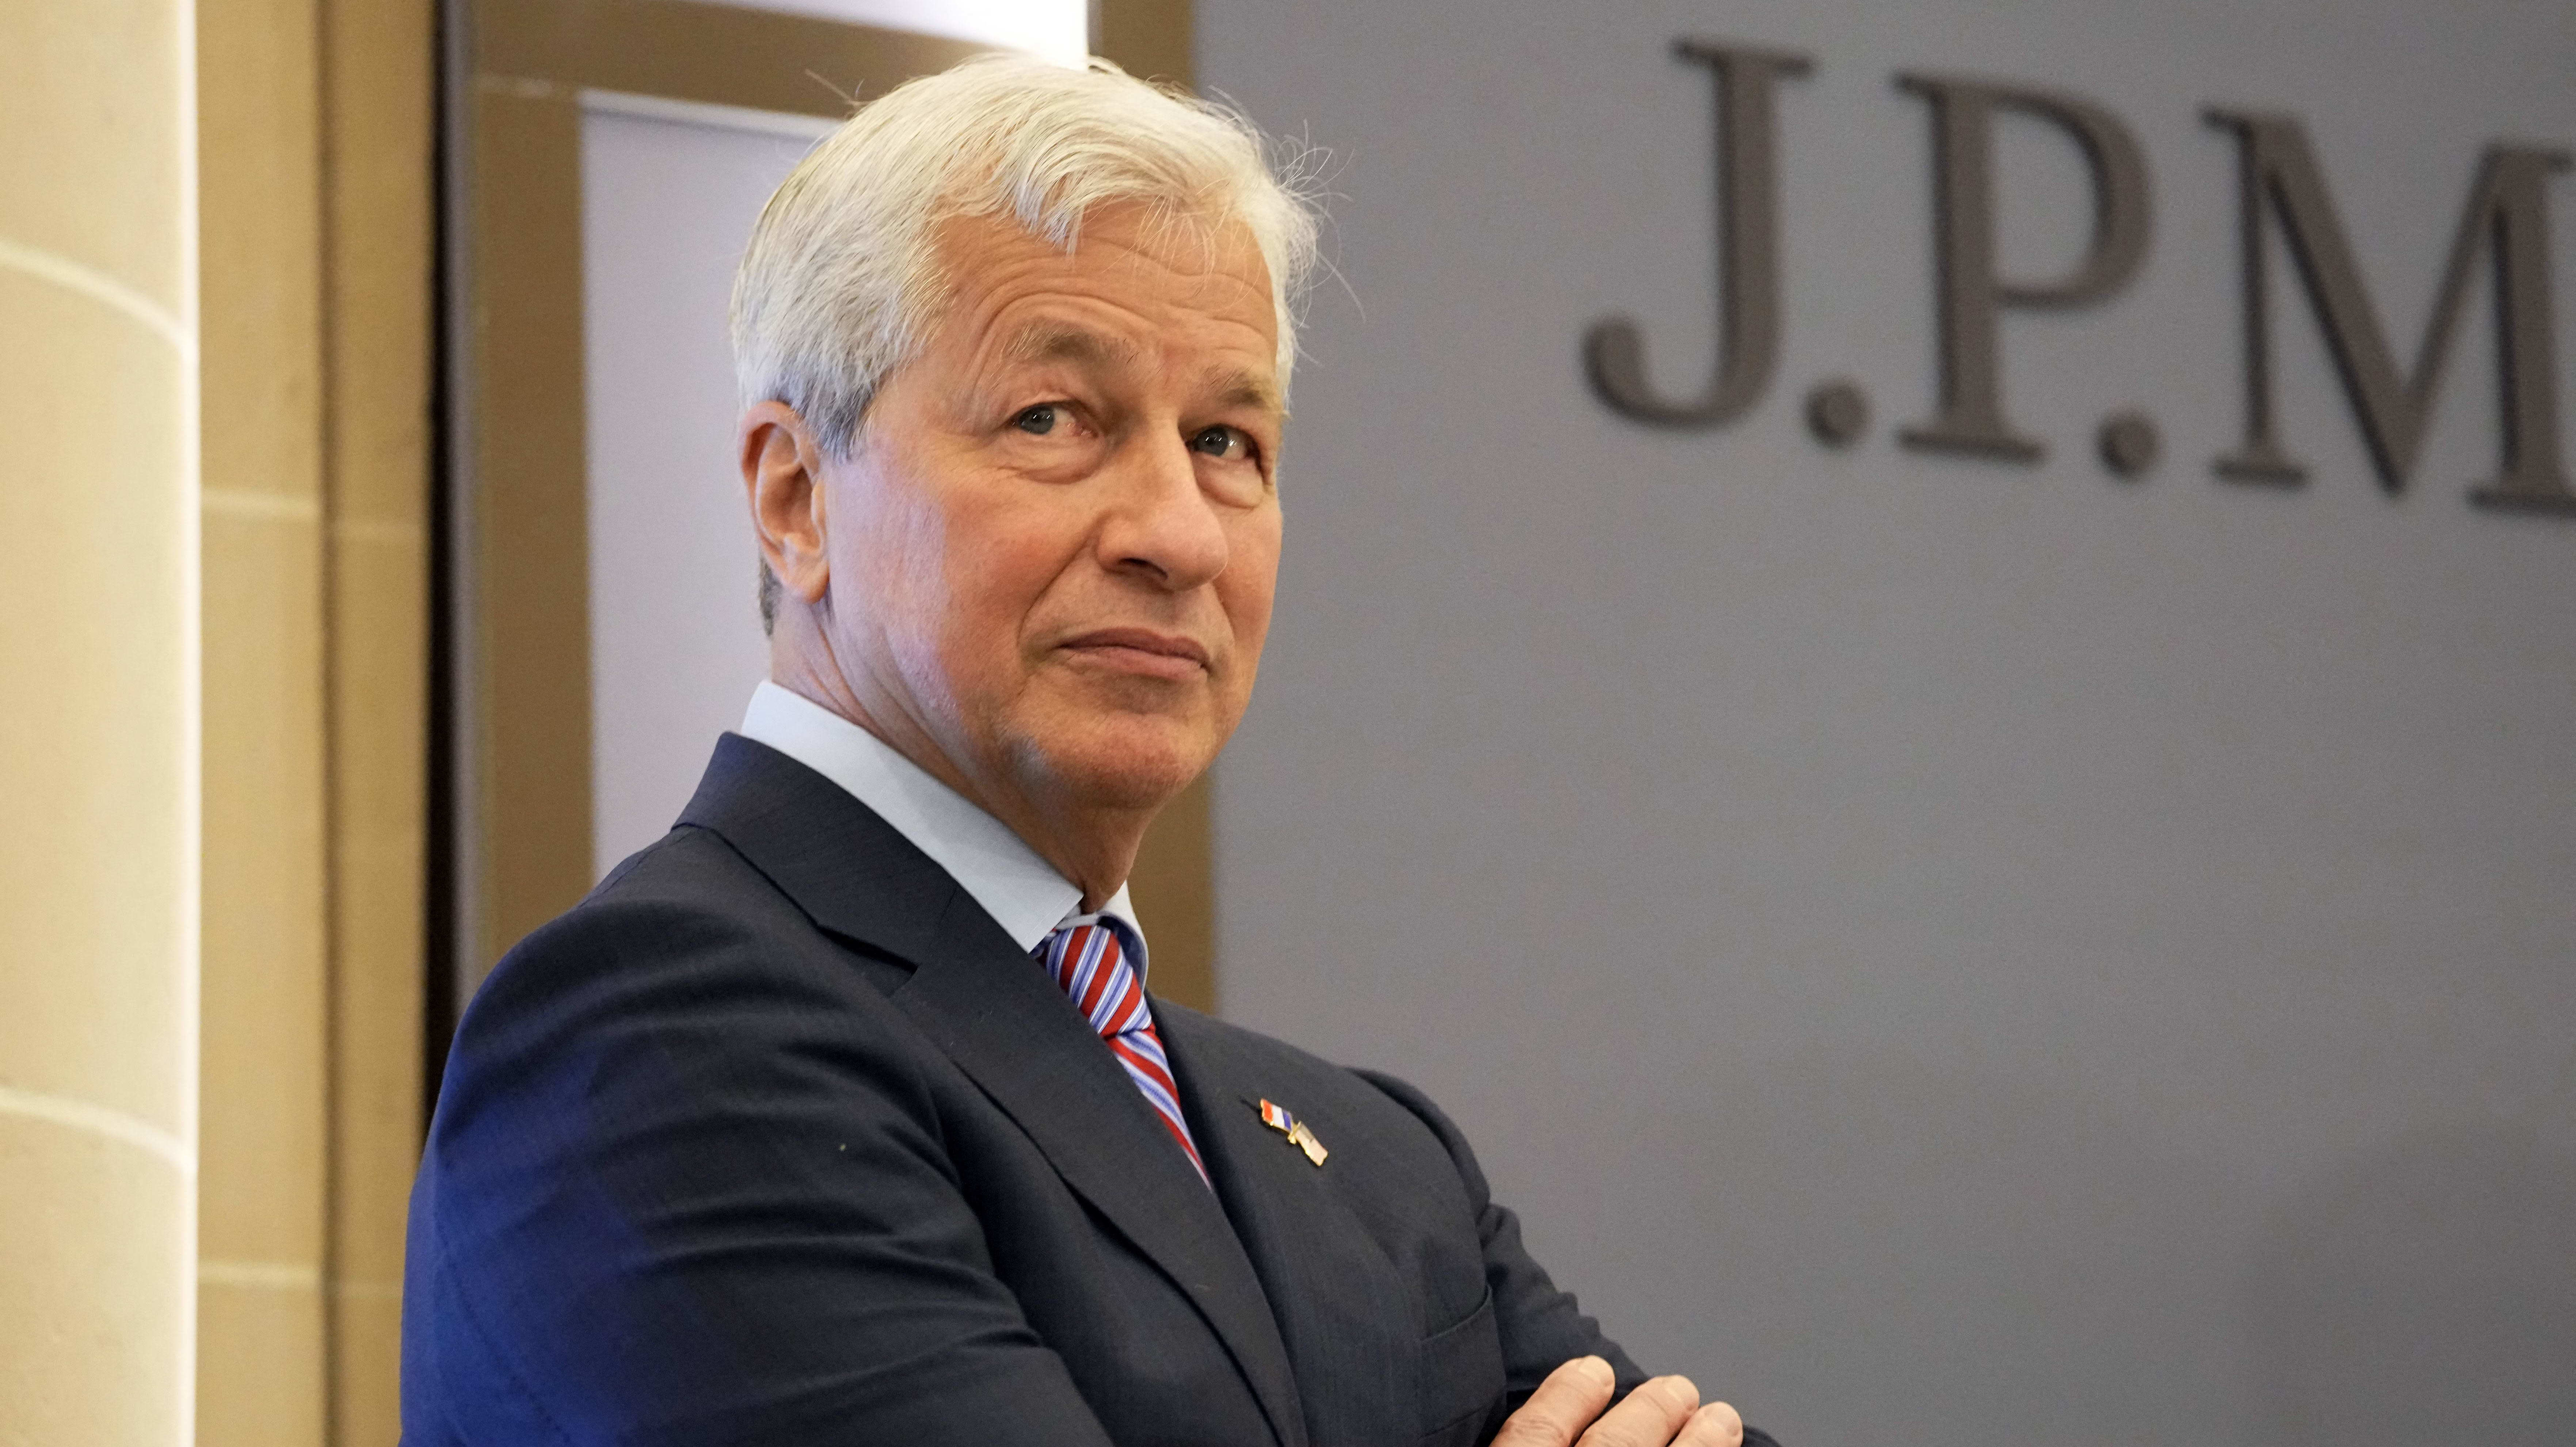 JPMorgan CEO Jamie Dimon rips remote work and Zoom as 'management by  Hollywood Squares' and says returning to the office will aid diversity